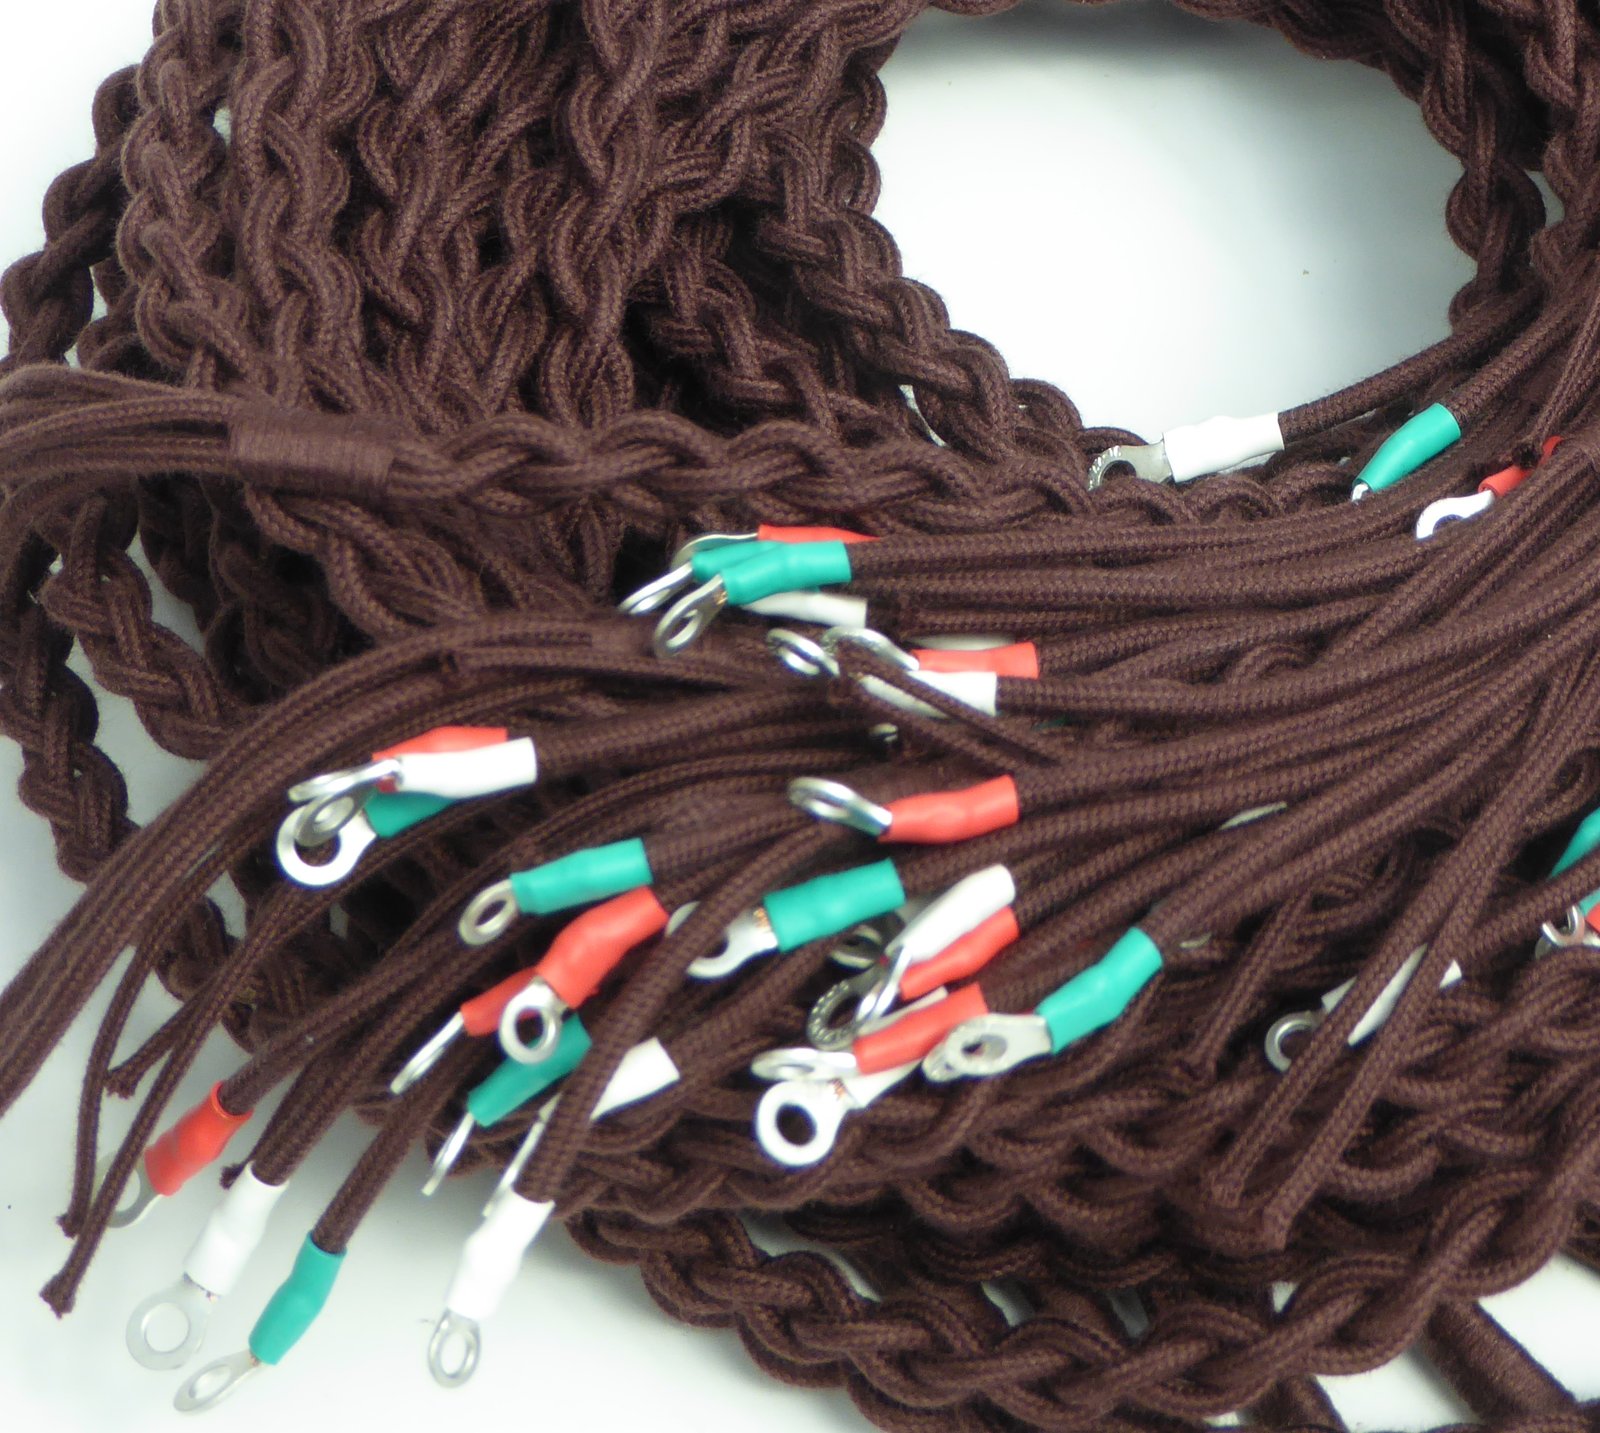 Bakelite GPO Telephone Handset Cord All Colours Top Quality Braided & Plaited 